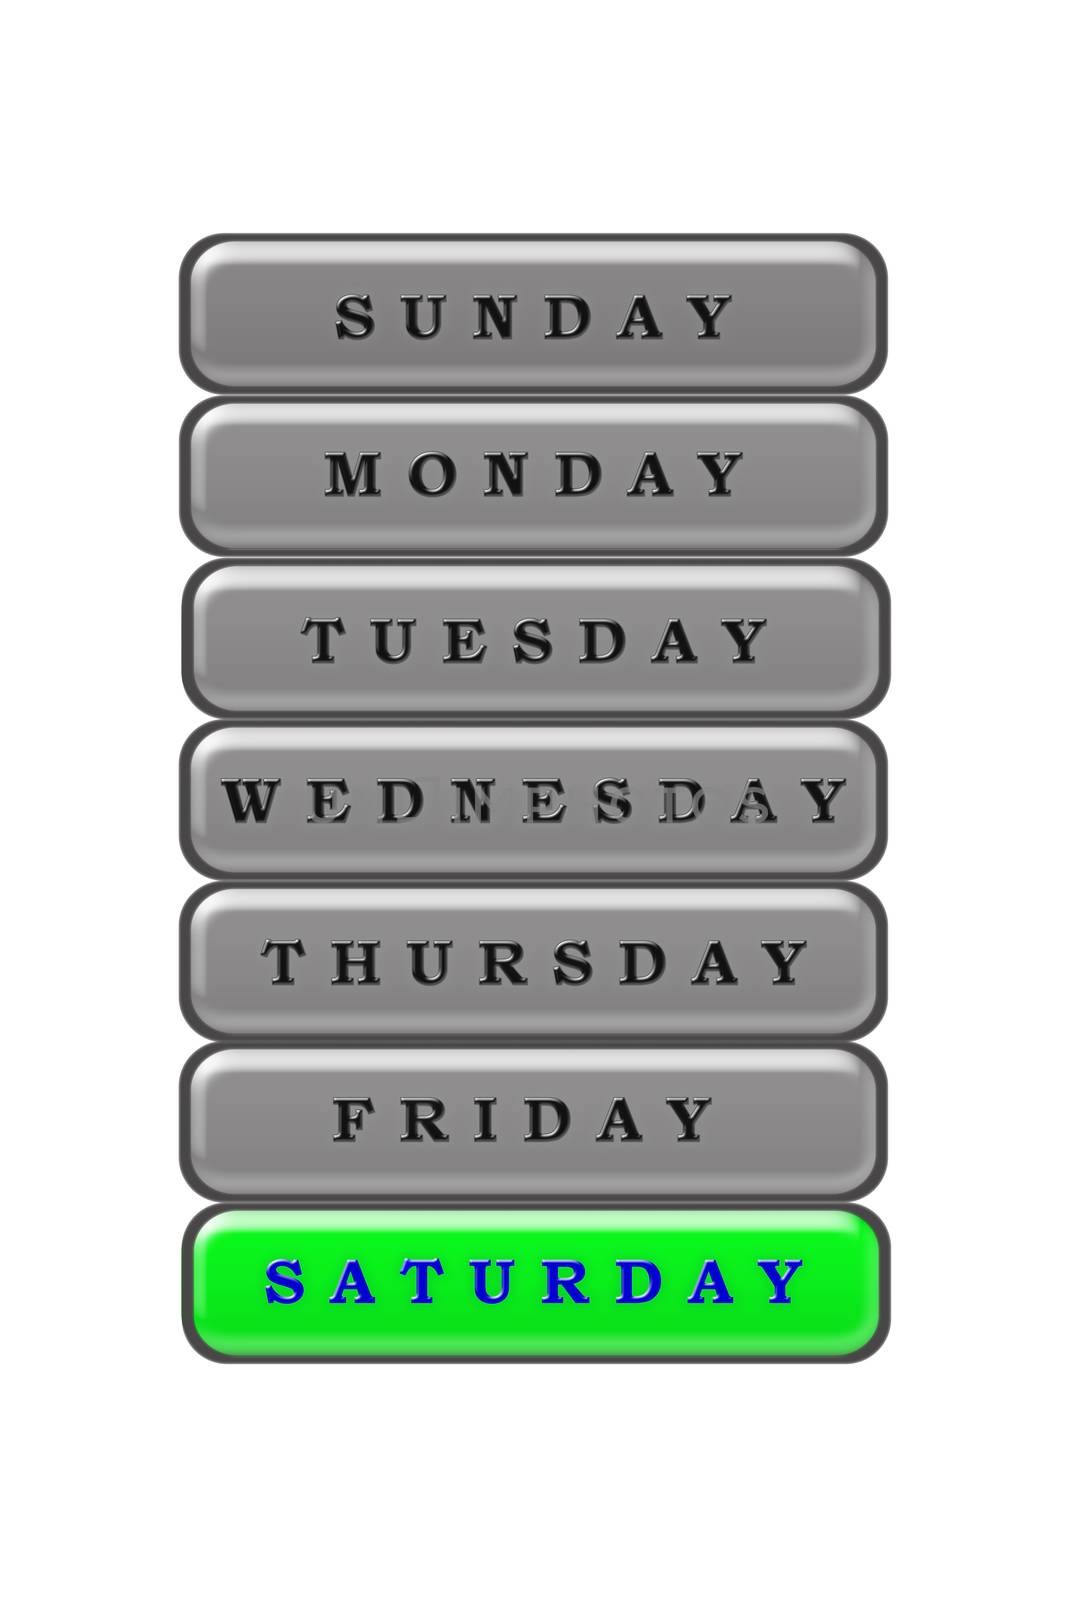 Among the list of days of the week on a green background blue highlighted Saturday.  The rest of the days are black on a gray background.